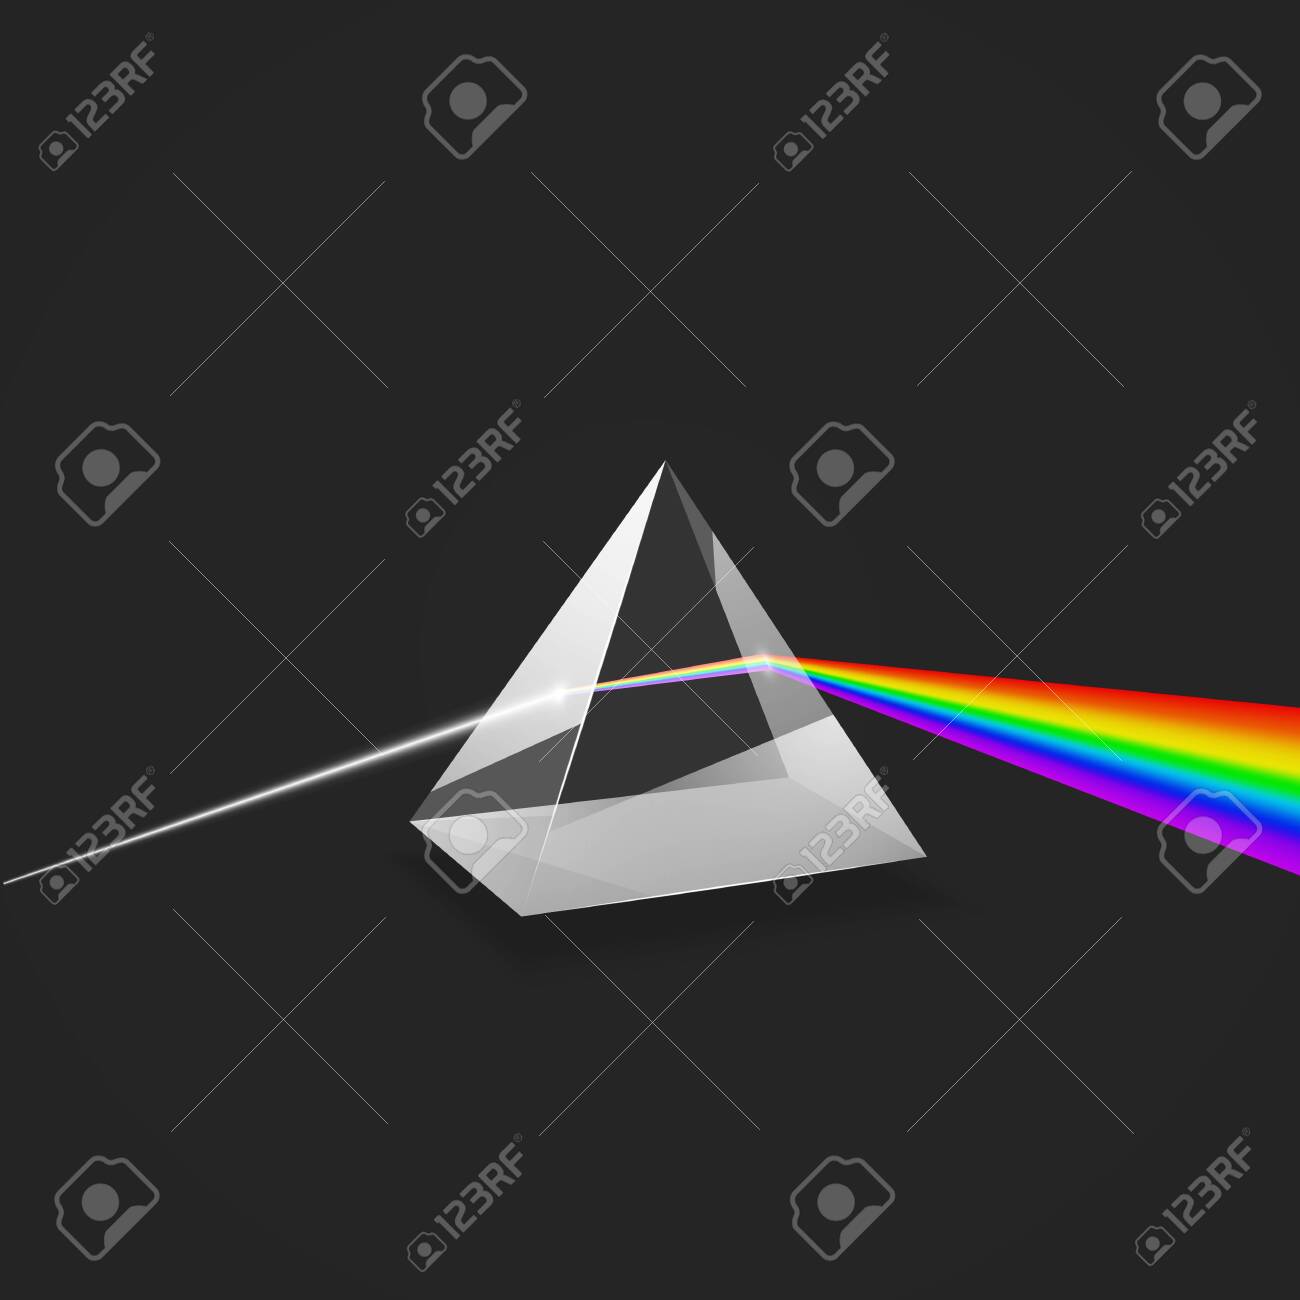 123249964-dispersion-colorful-spectrum-of-light-glass-prism-and-beam-of-light-science-experiment-with-light-ve.jpg